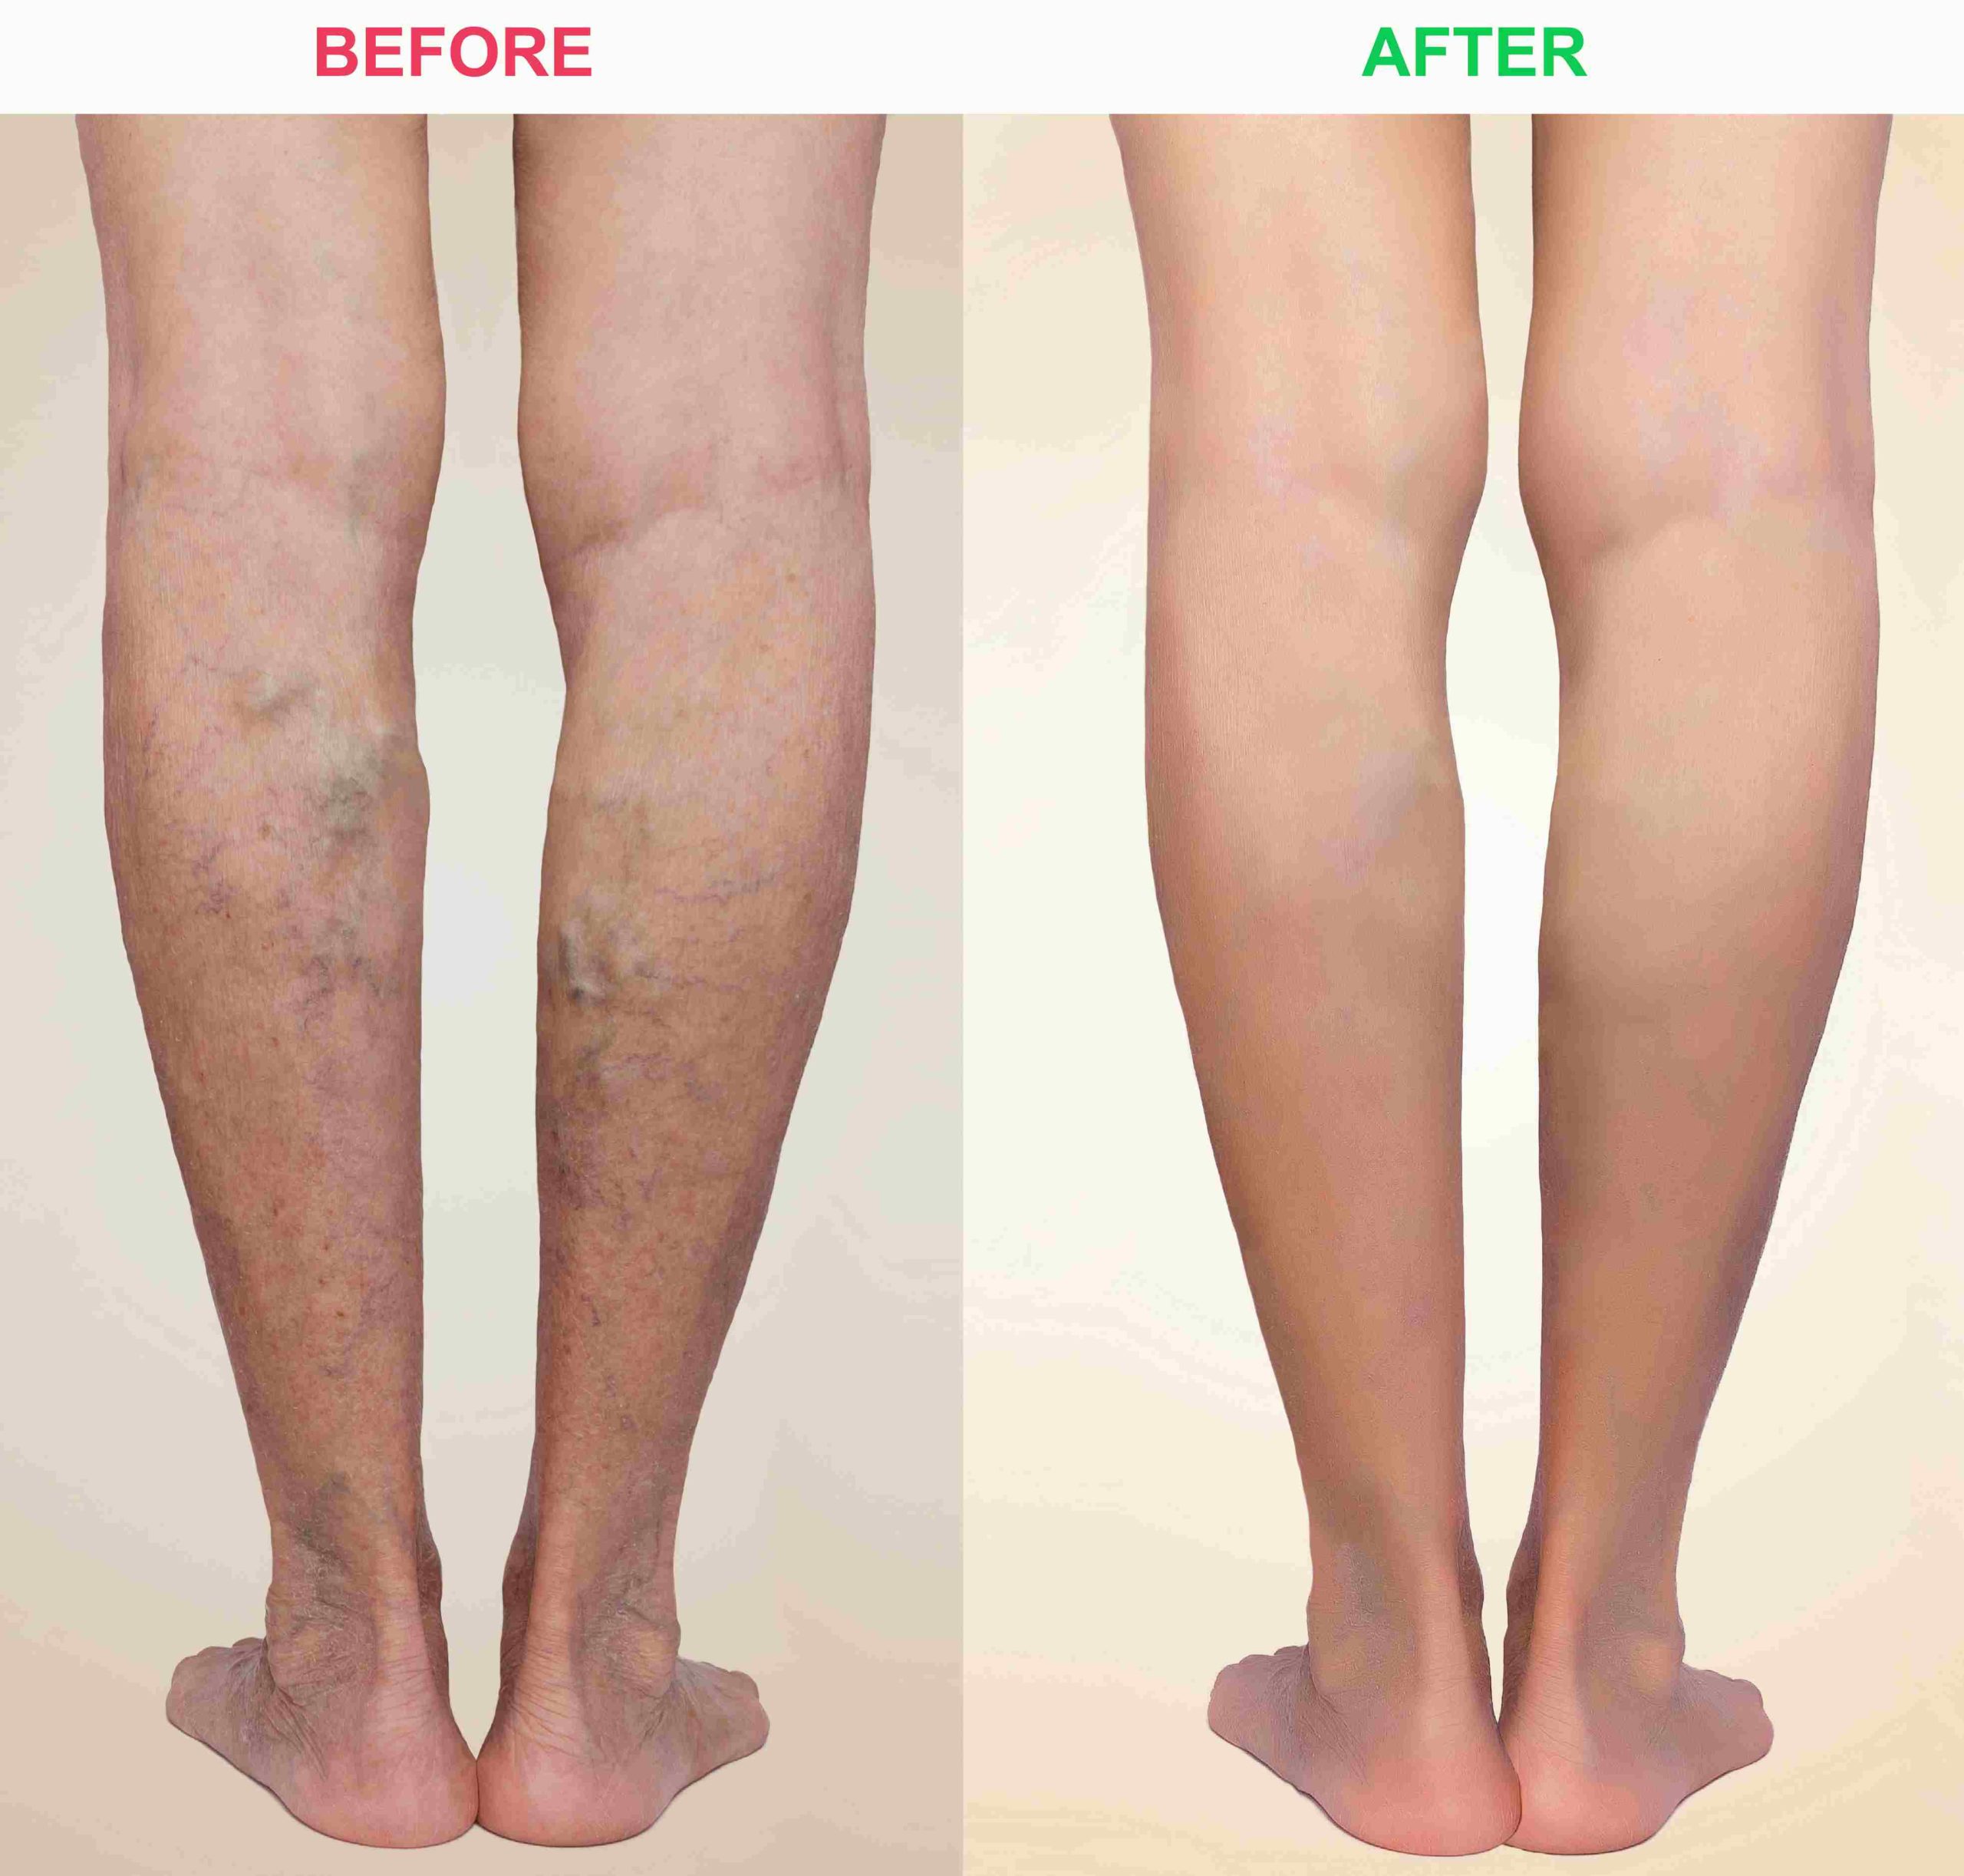 Before and After Laer Vein Removal treatment | Avail Aesthetics in Cary, Raleigh & Wake Forest, NC